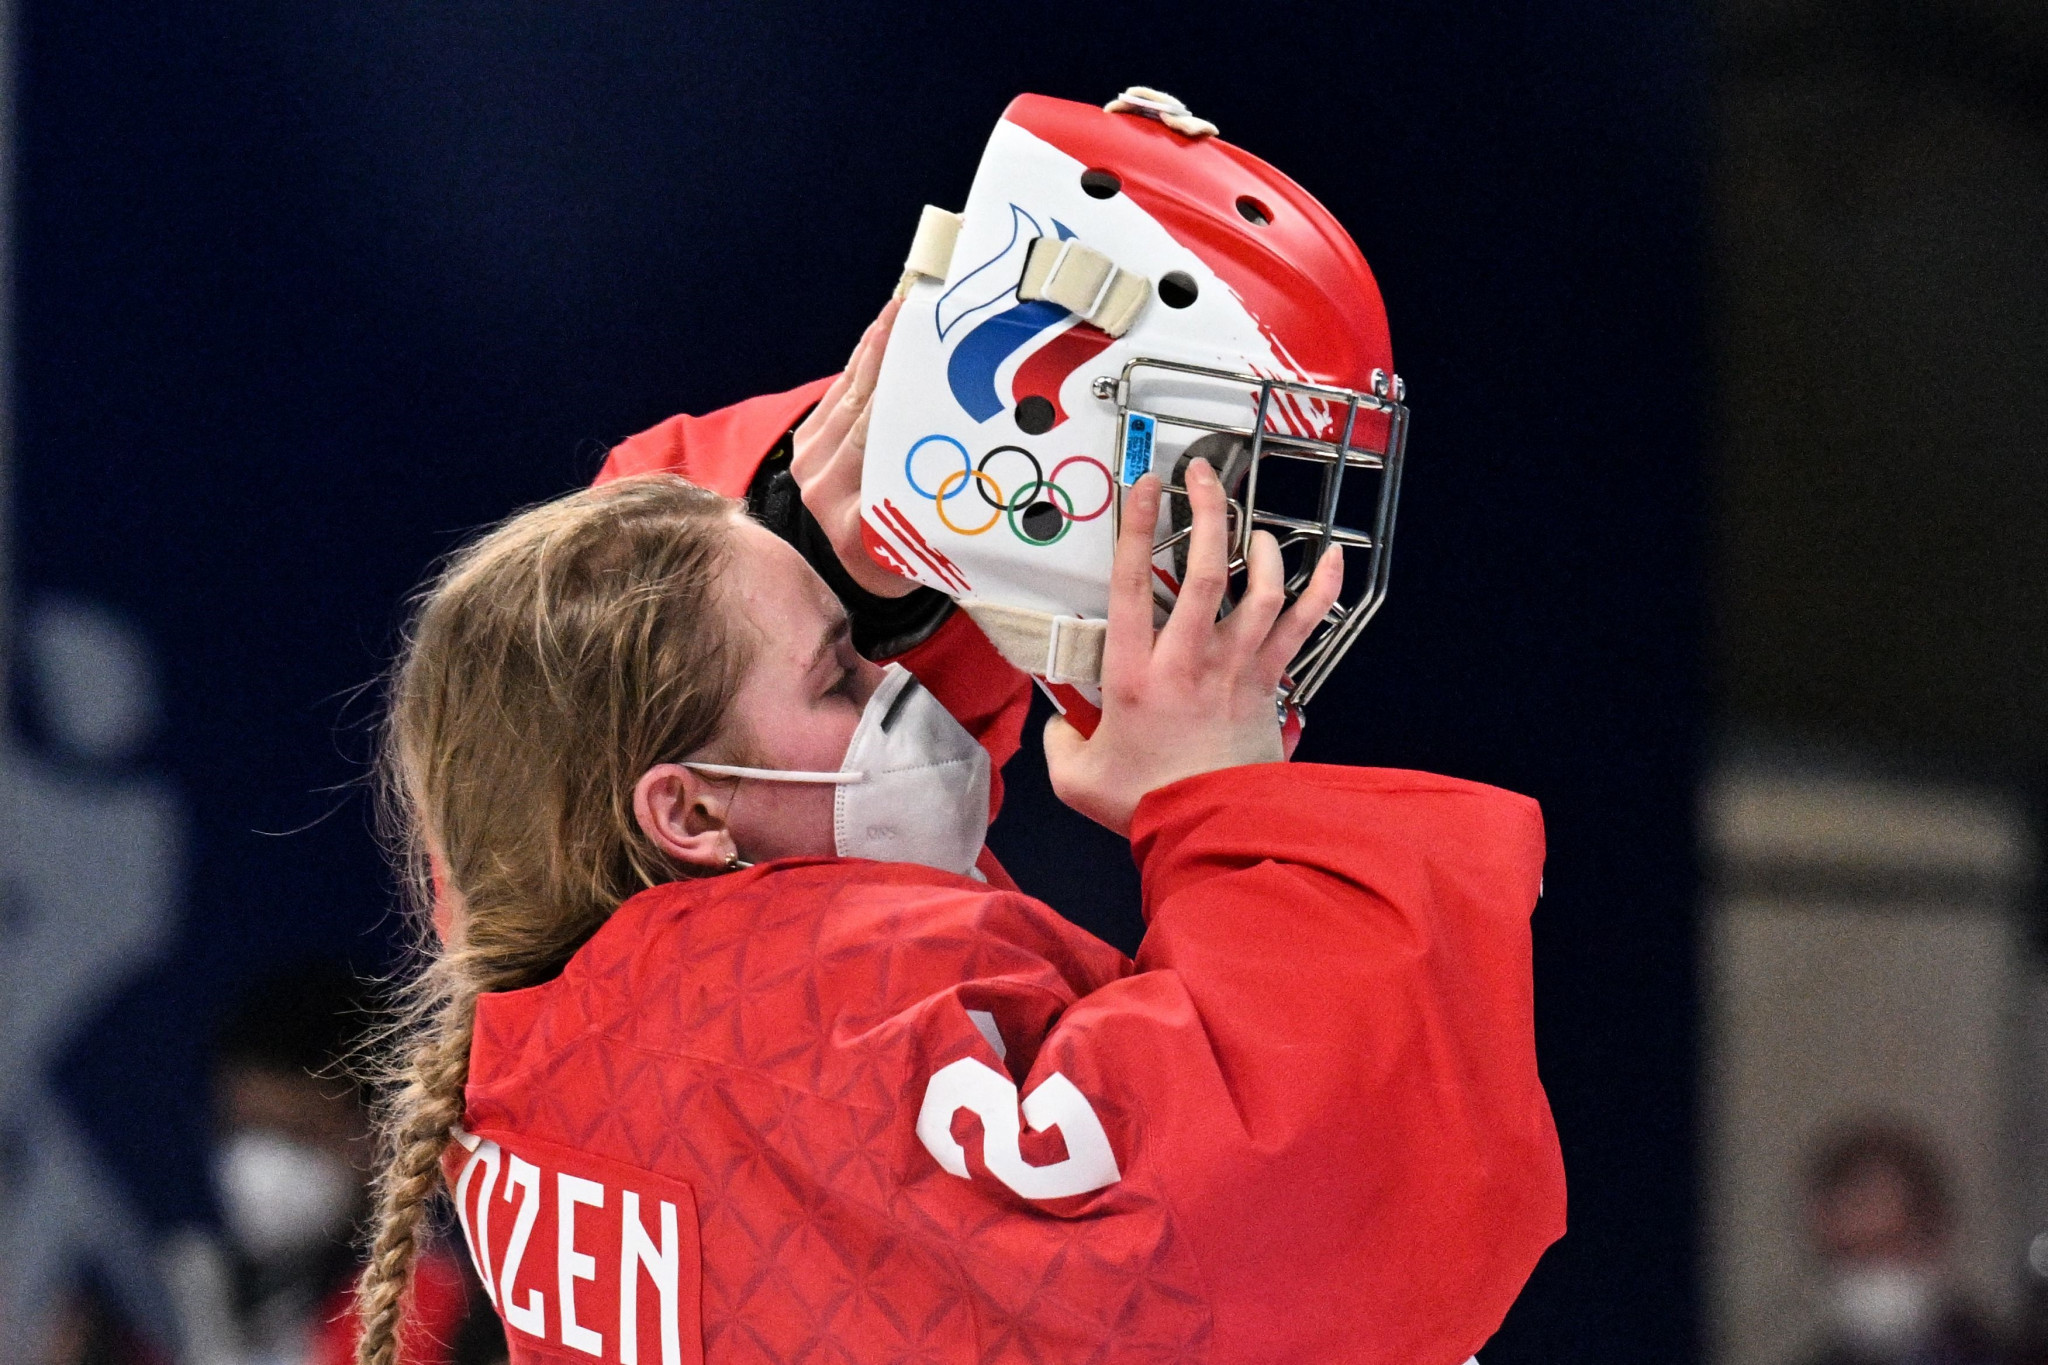 ROC's players wore masks at Beijing 2022 in the first two periods against Canada before taking them off for the final 20 minutes but now put them back on again for their quarter-final against Switzerland ©Getty Images